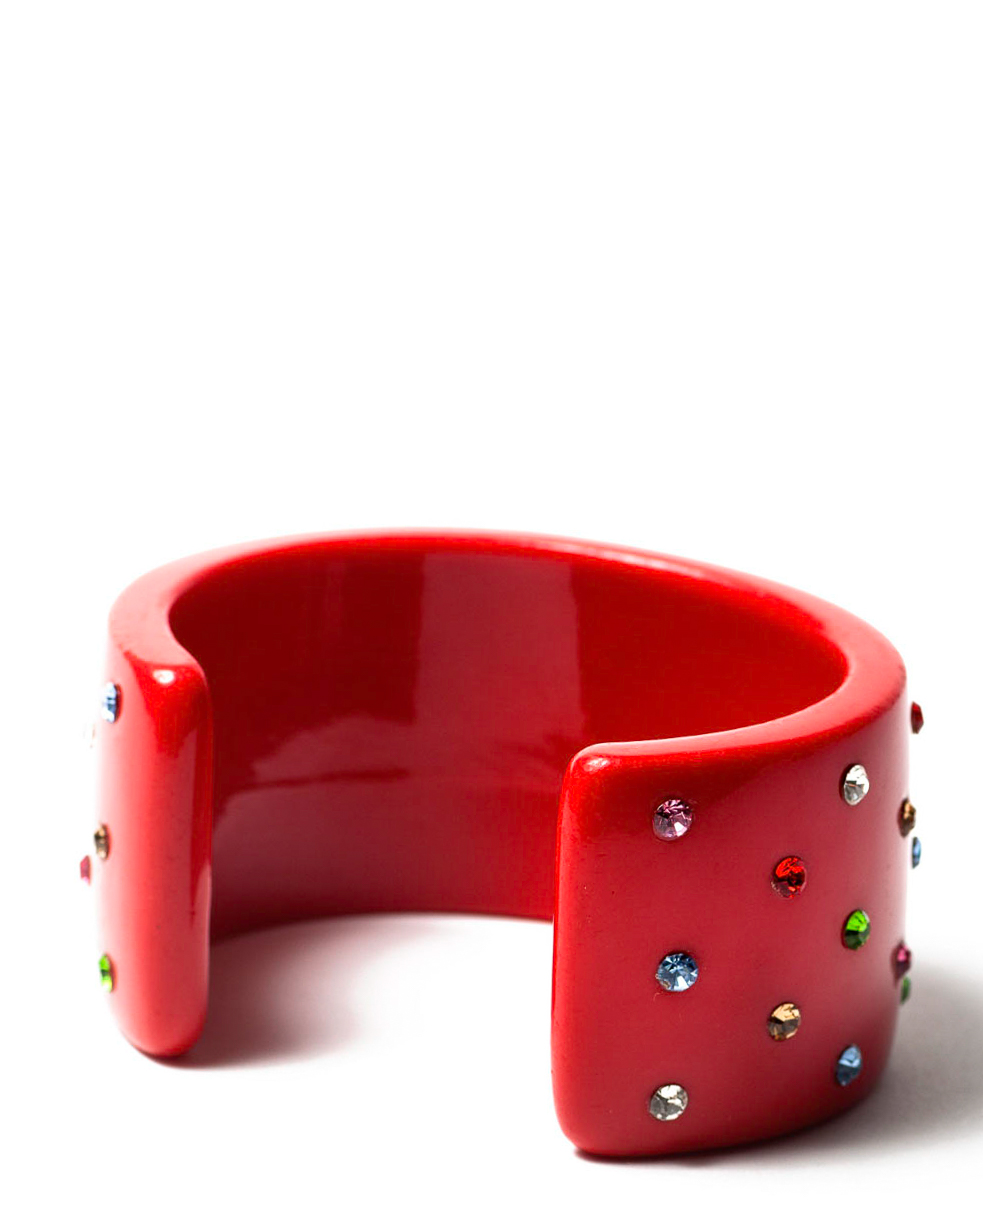 Vintage Red French Bakelite and Multi Colored Rhinestone Cuff Bracelet, circa 1930's